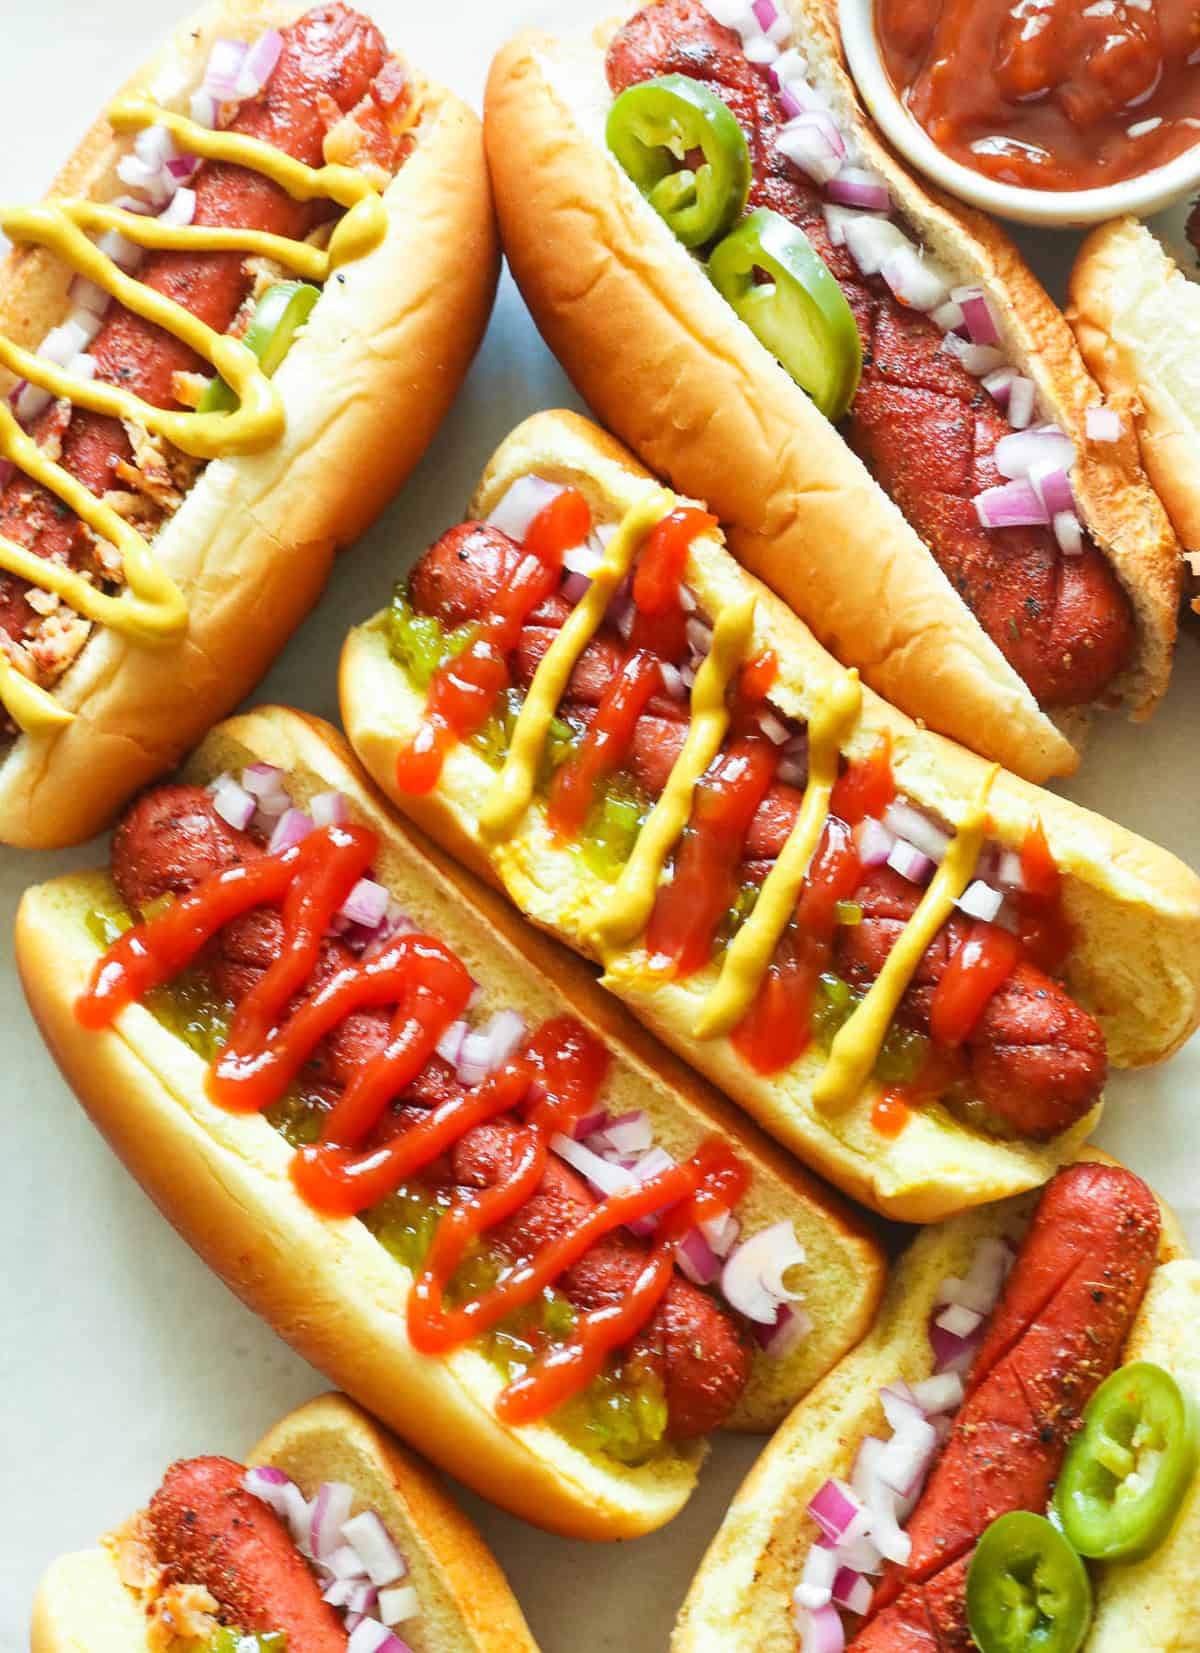 Smoked hotdogs from Feed the Grill 